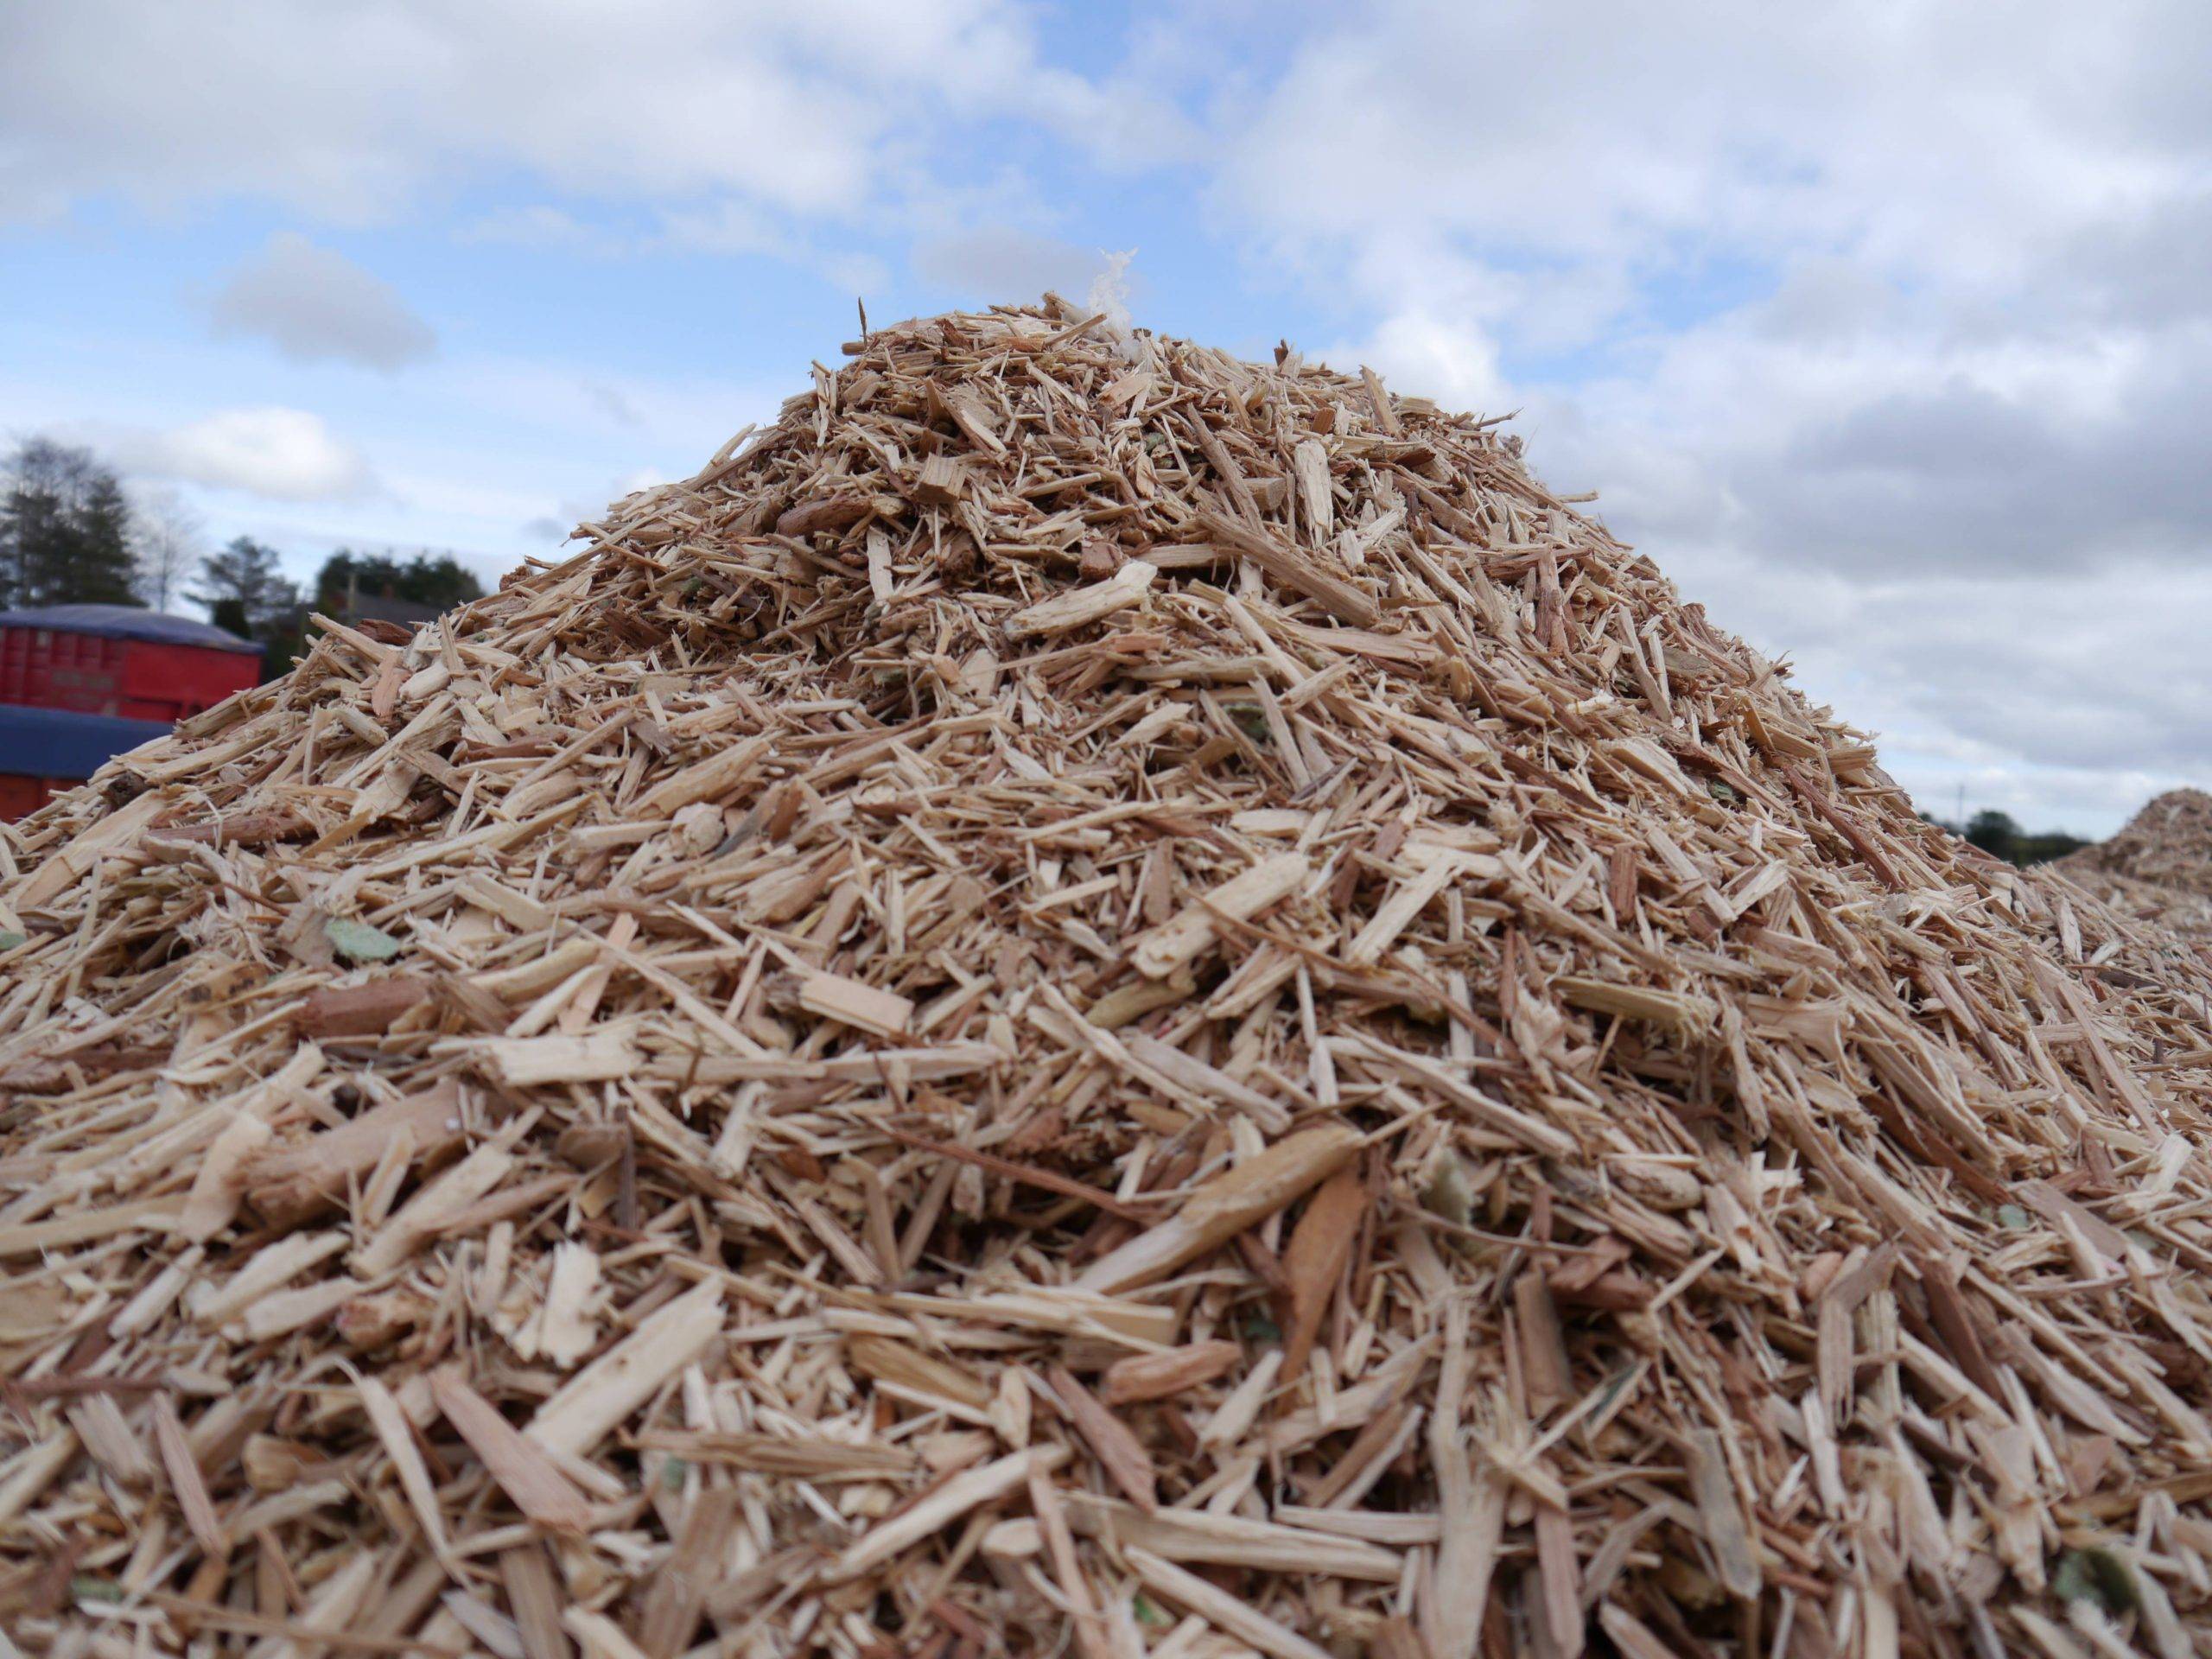 Government Support Extended for Biomass Fuel